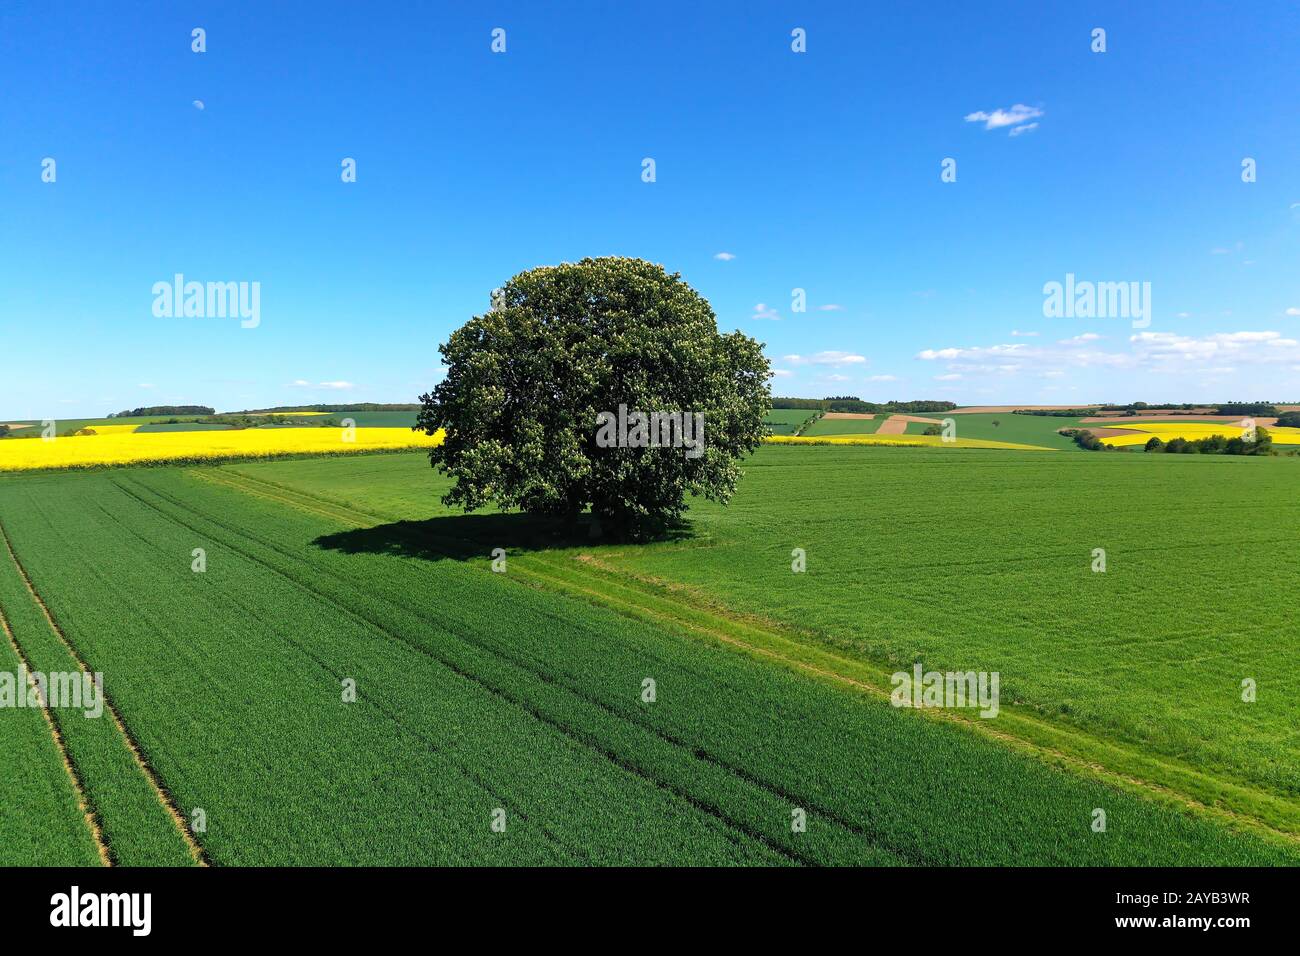 freestanding tree in front of blue sky Stock Photo